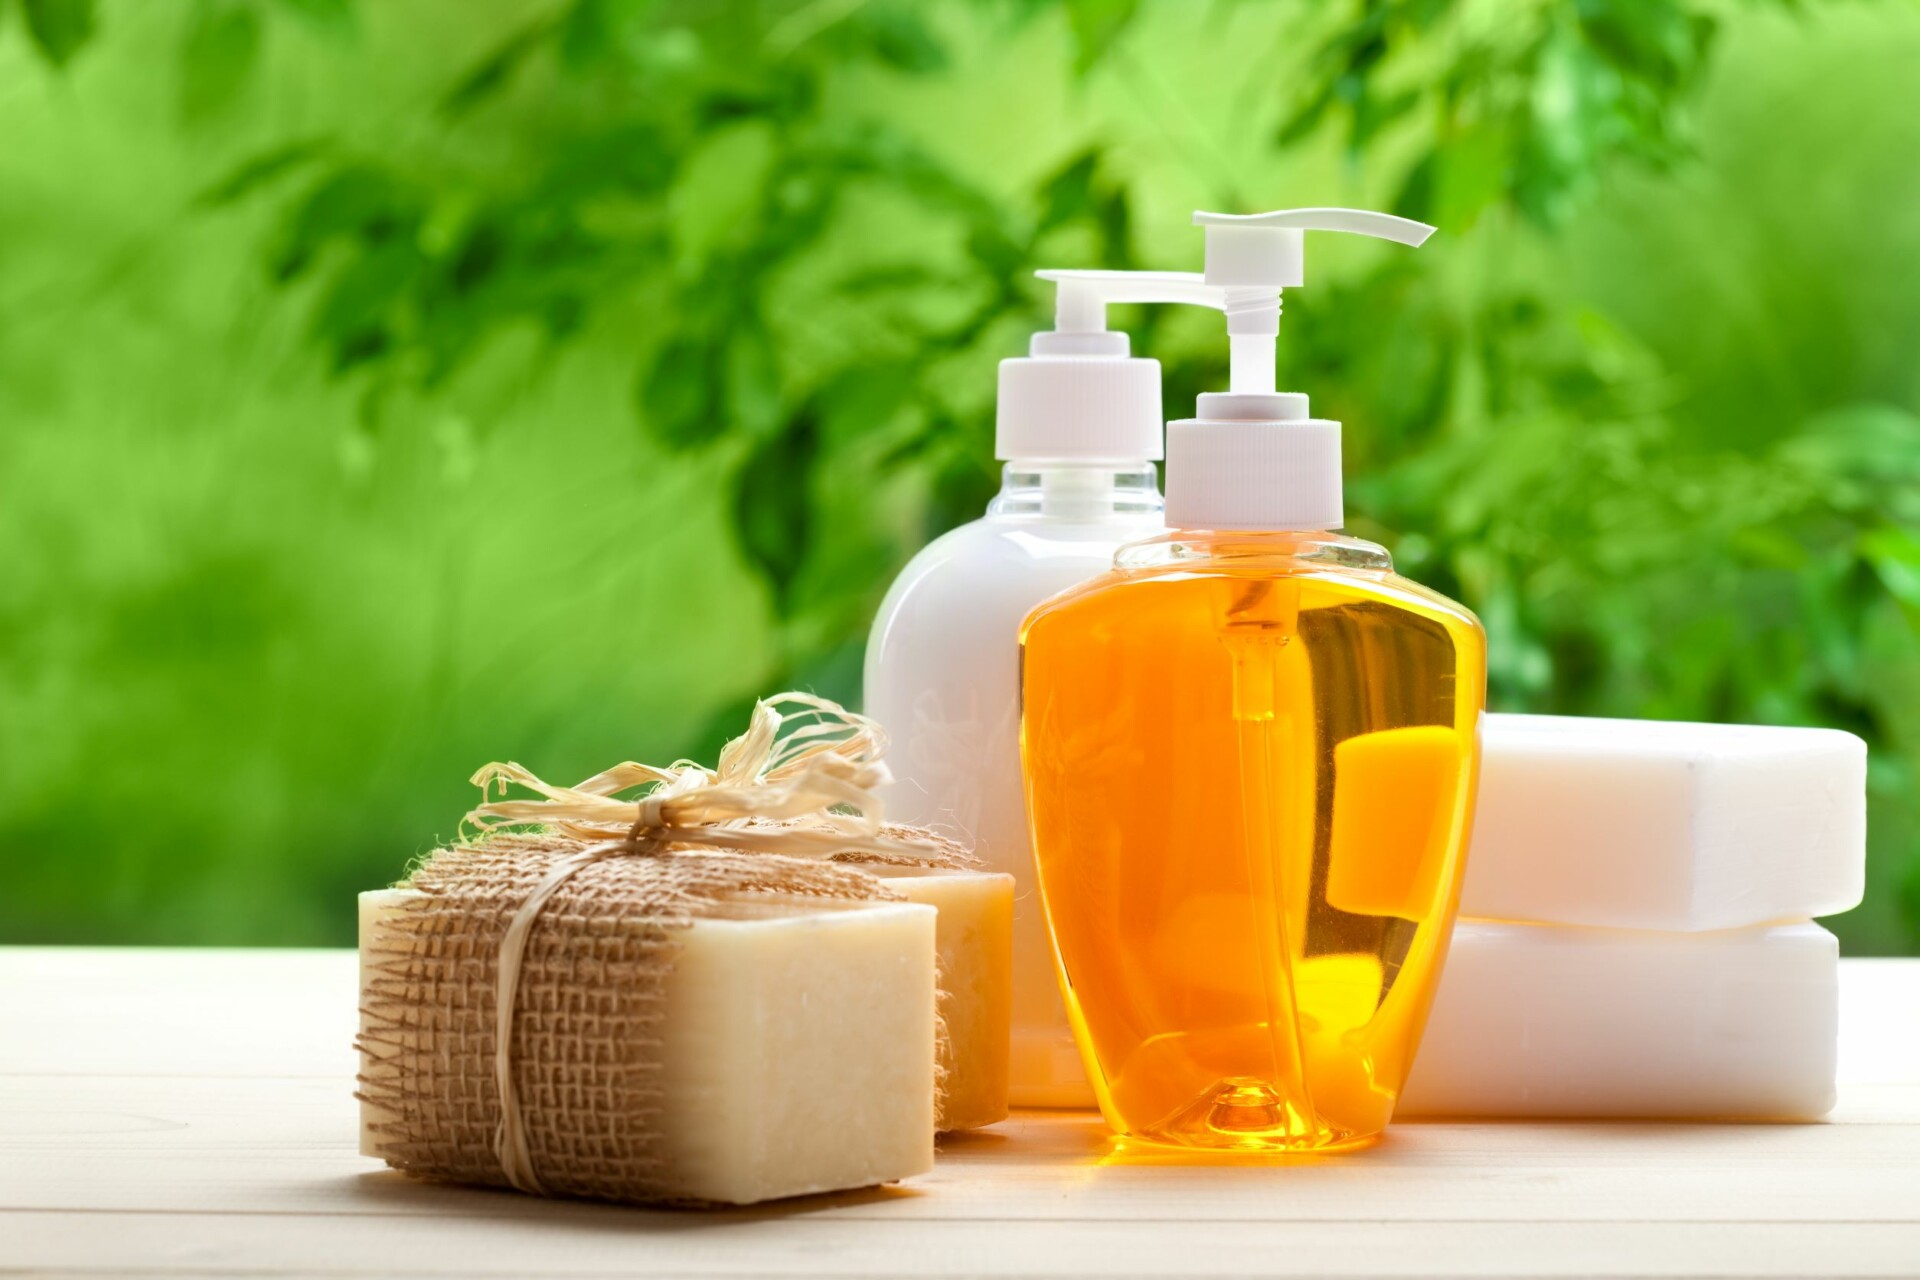 What Makes Soap Eco-Friendly? 9 Common Questions (Answered)